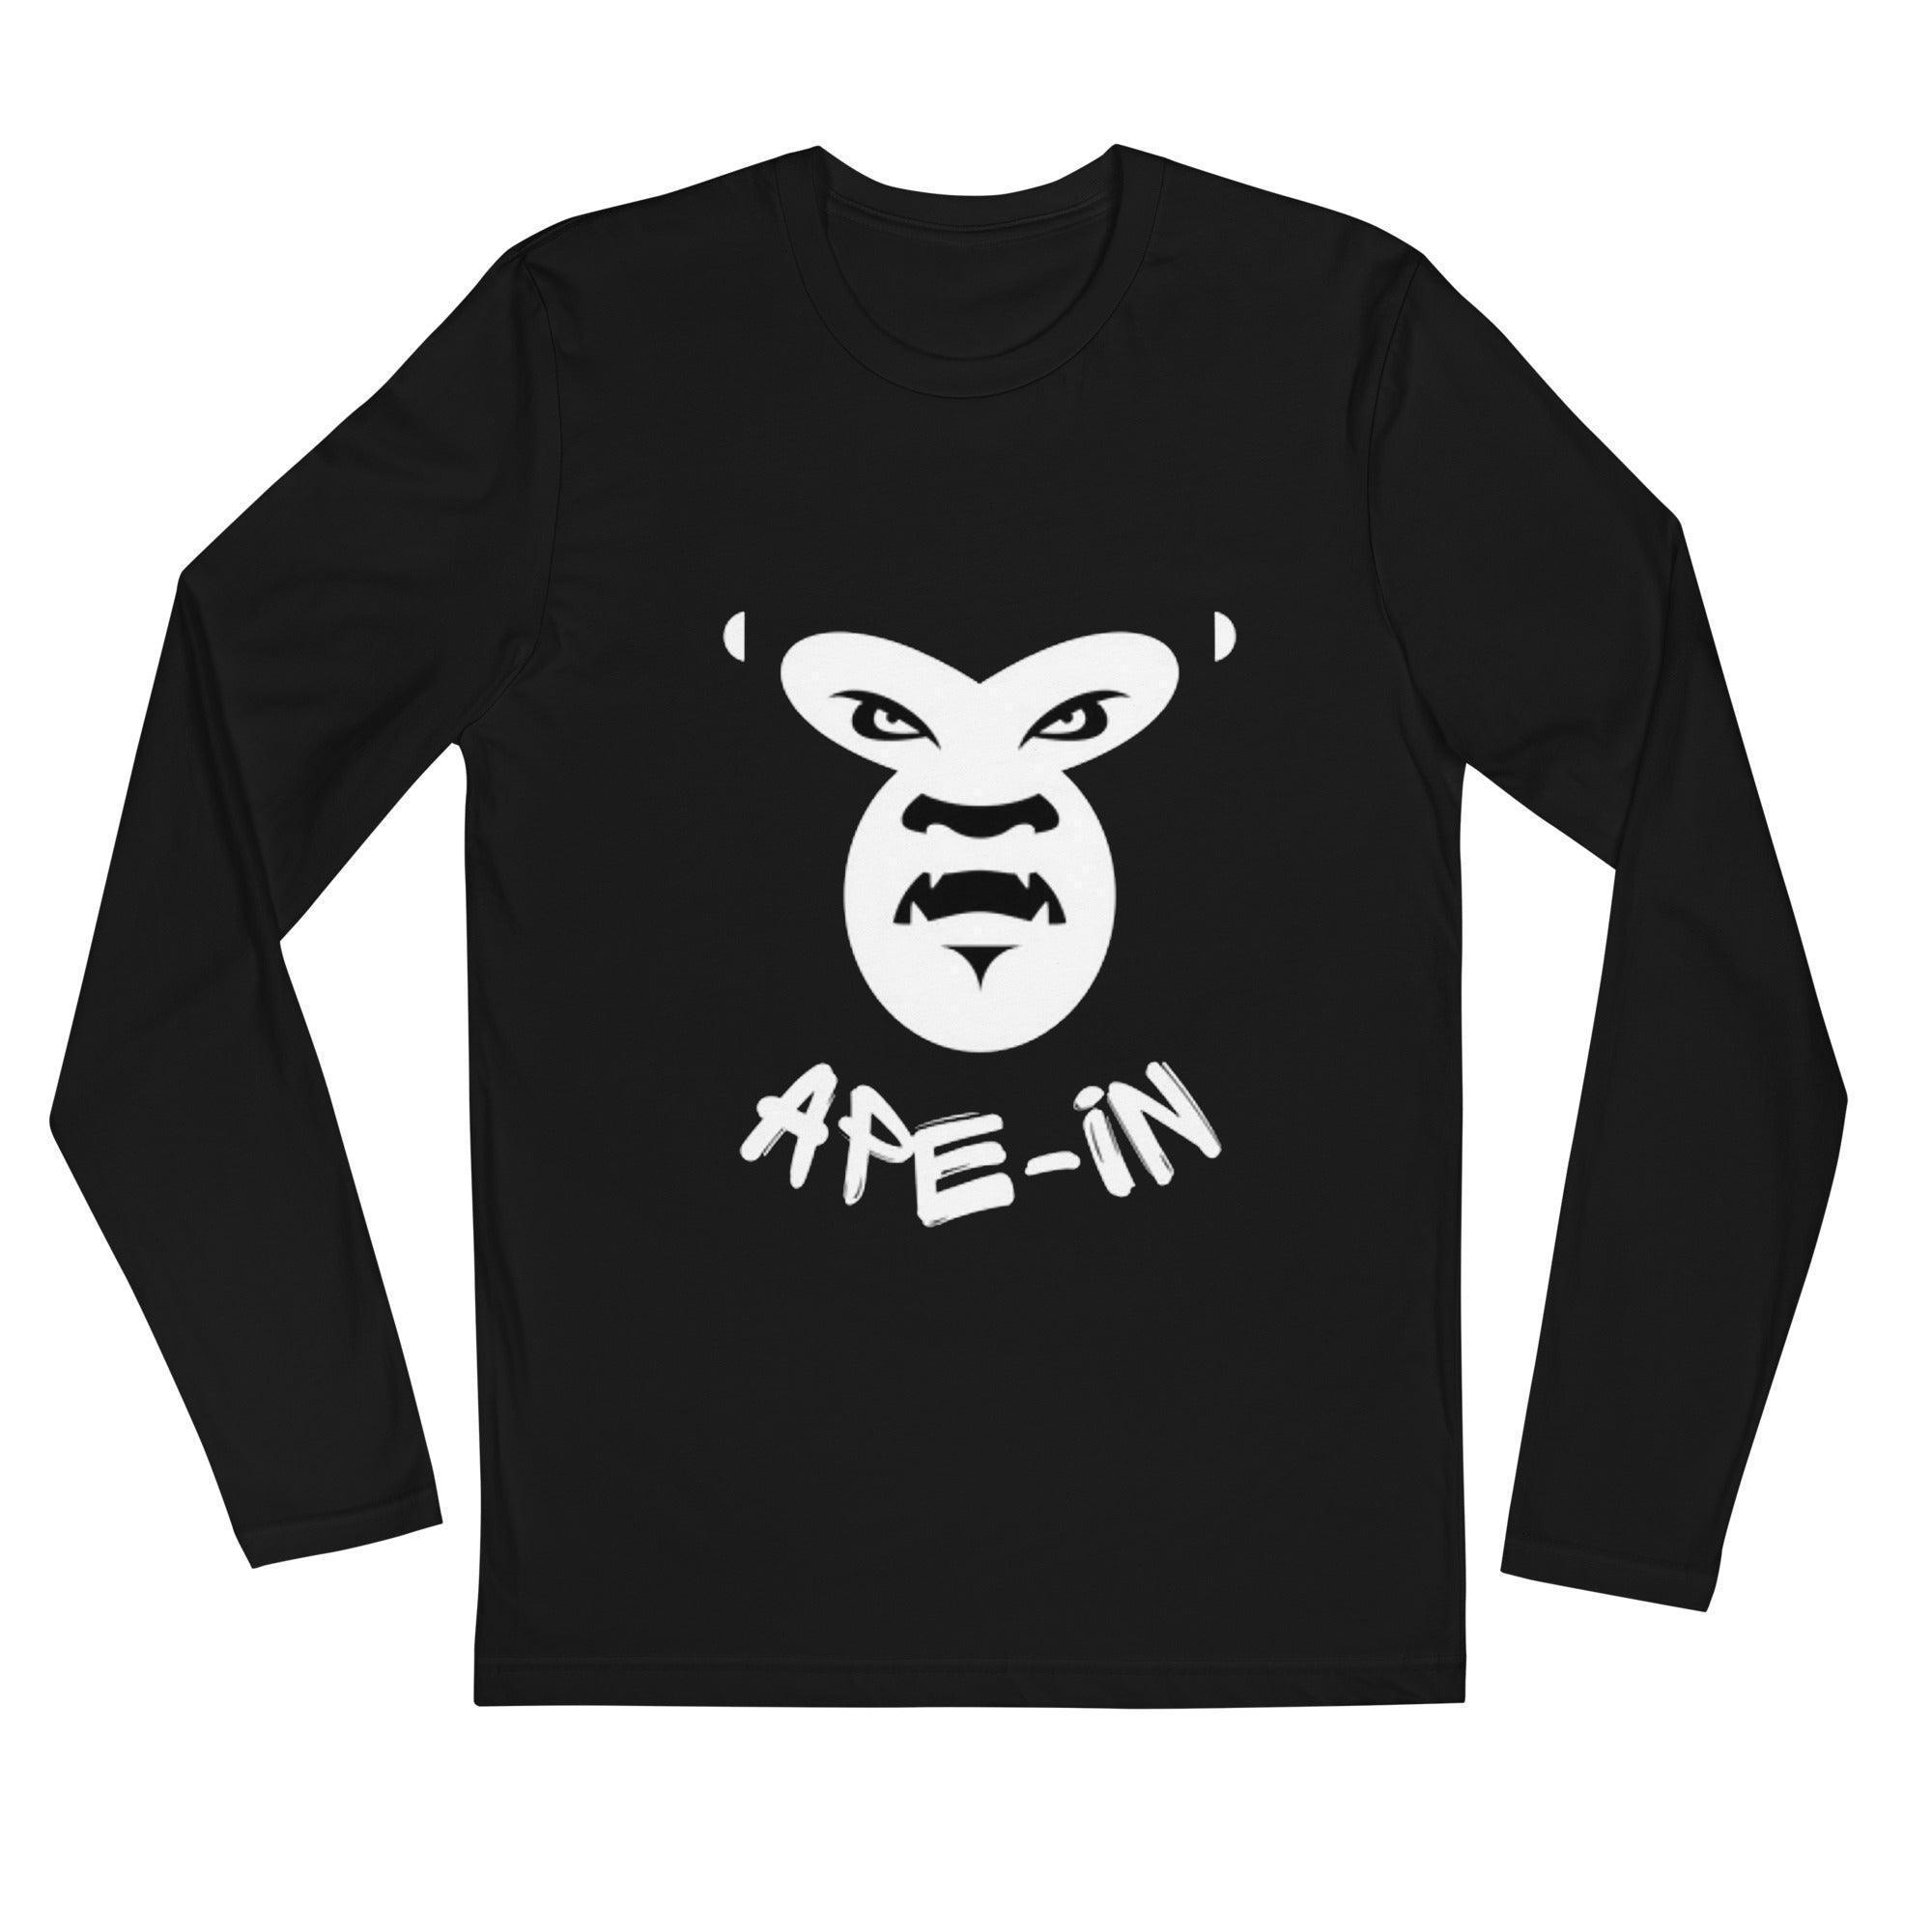 Ape In 2 Long Sleeve T-Shirt - InvestmenTees